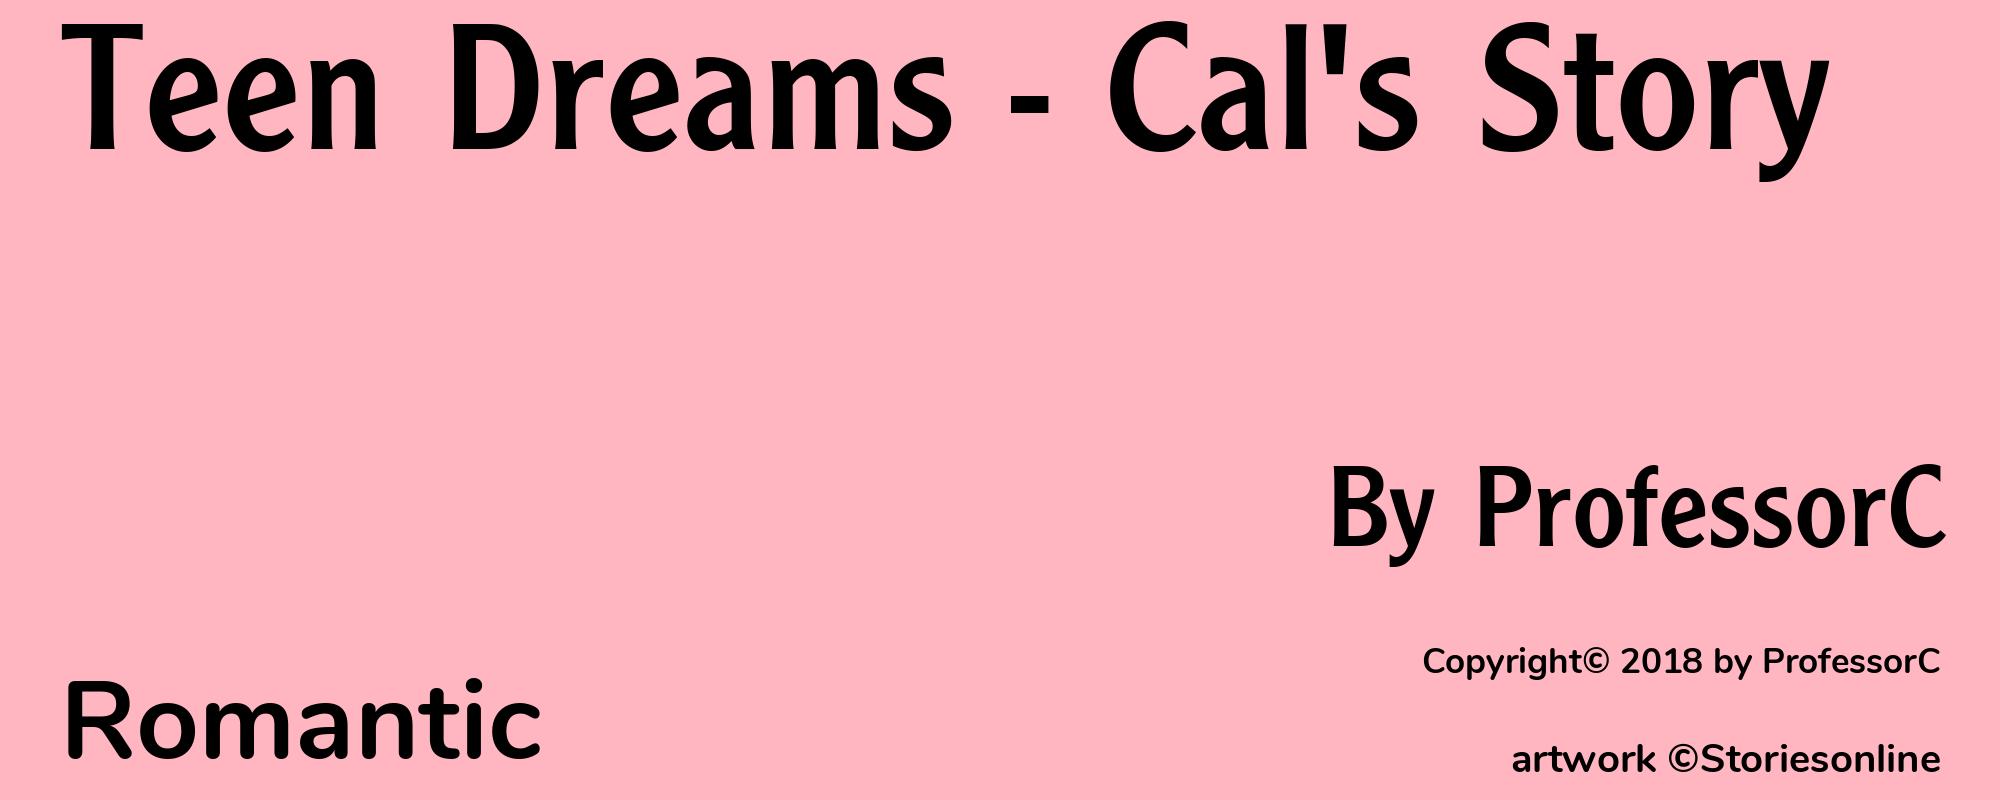 Teen Dreams - Cal's Story - Cover